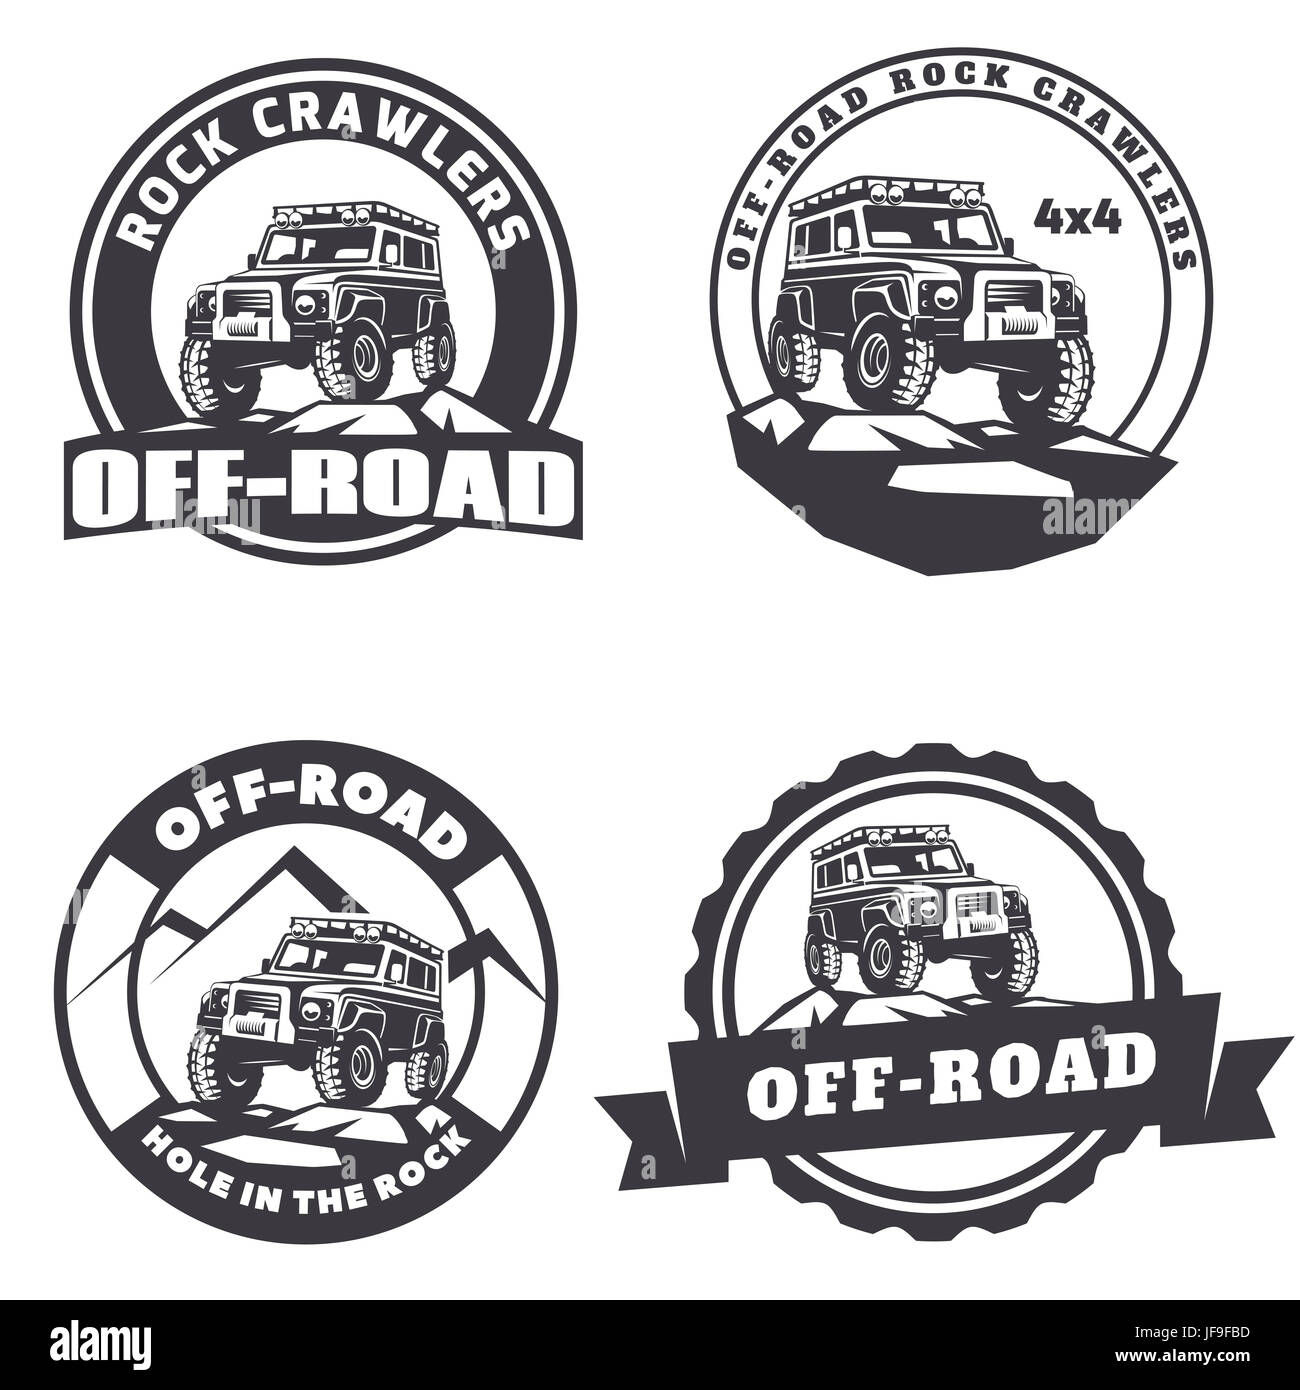 Set of off-road suv car round logo, emblems and badges. Stock Photo